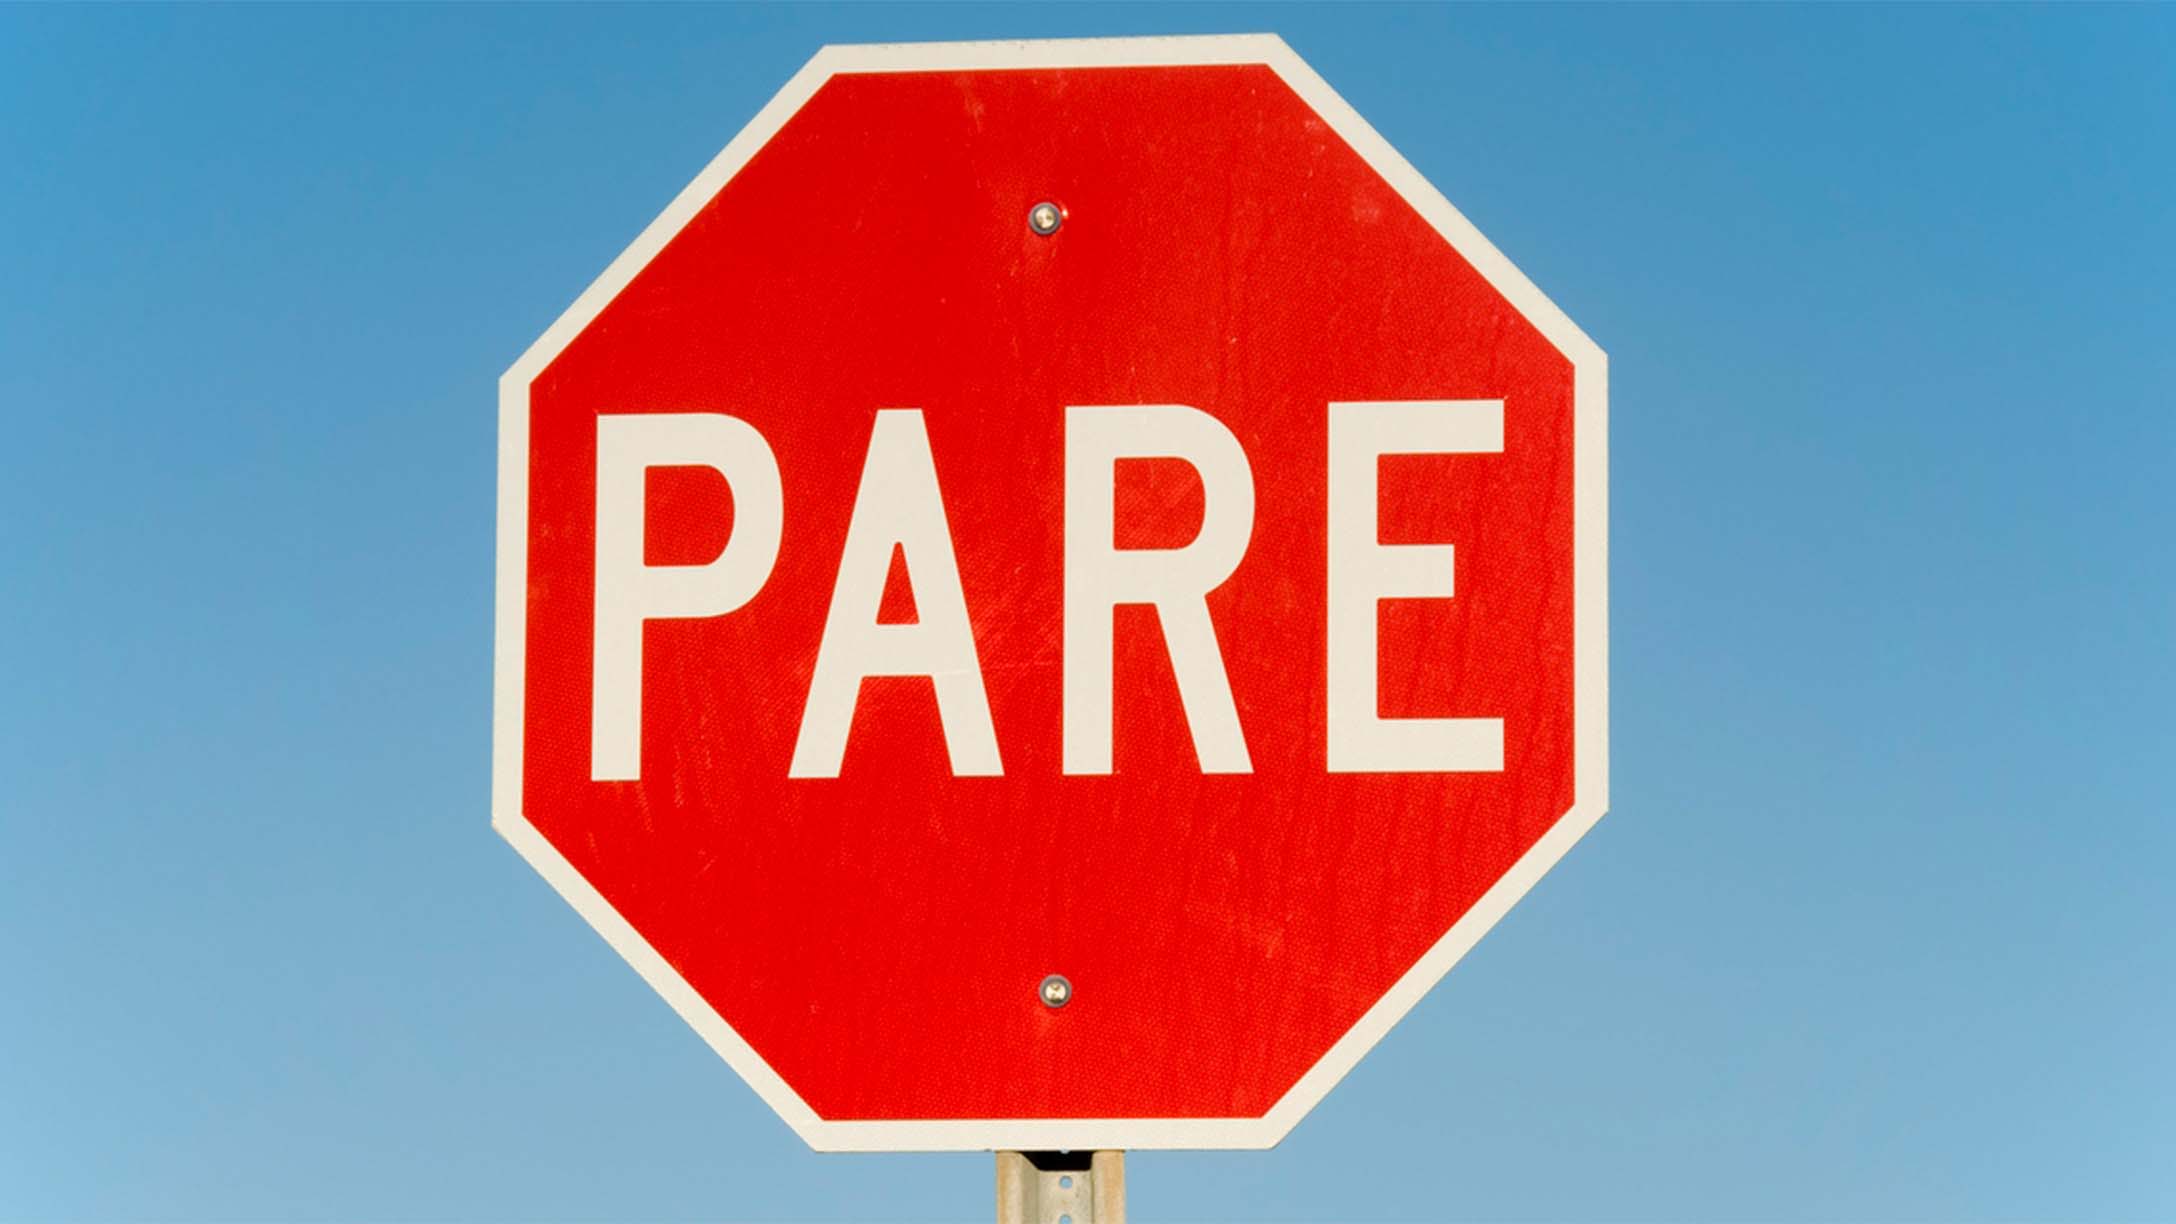 A stop sign in Spanish